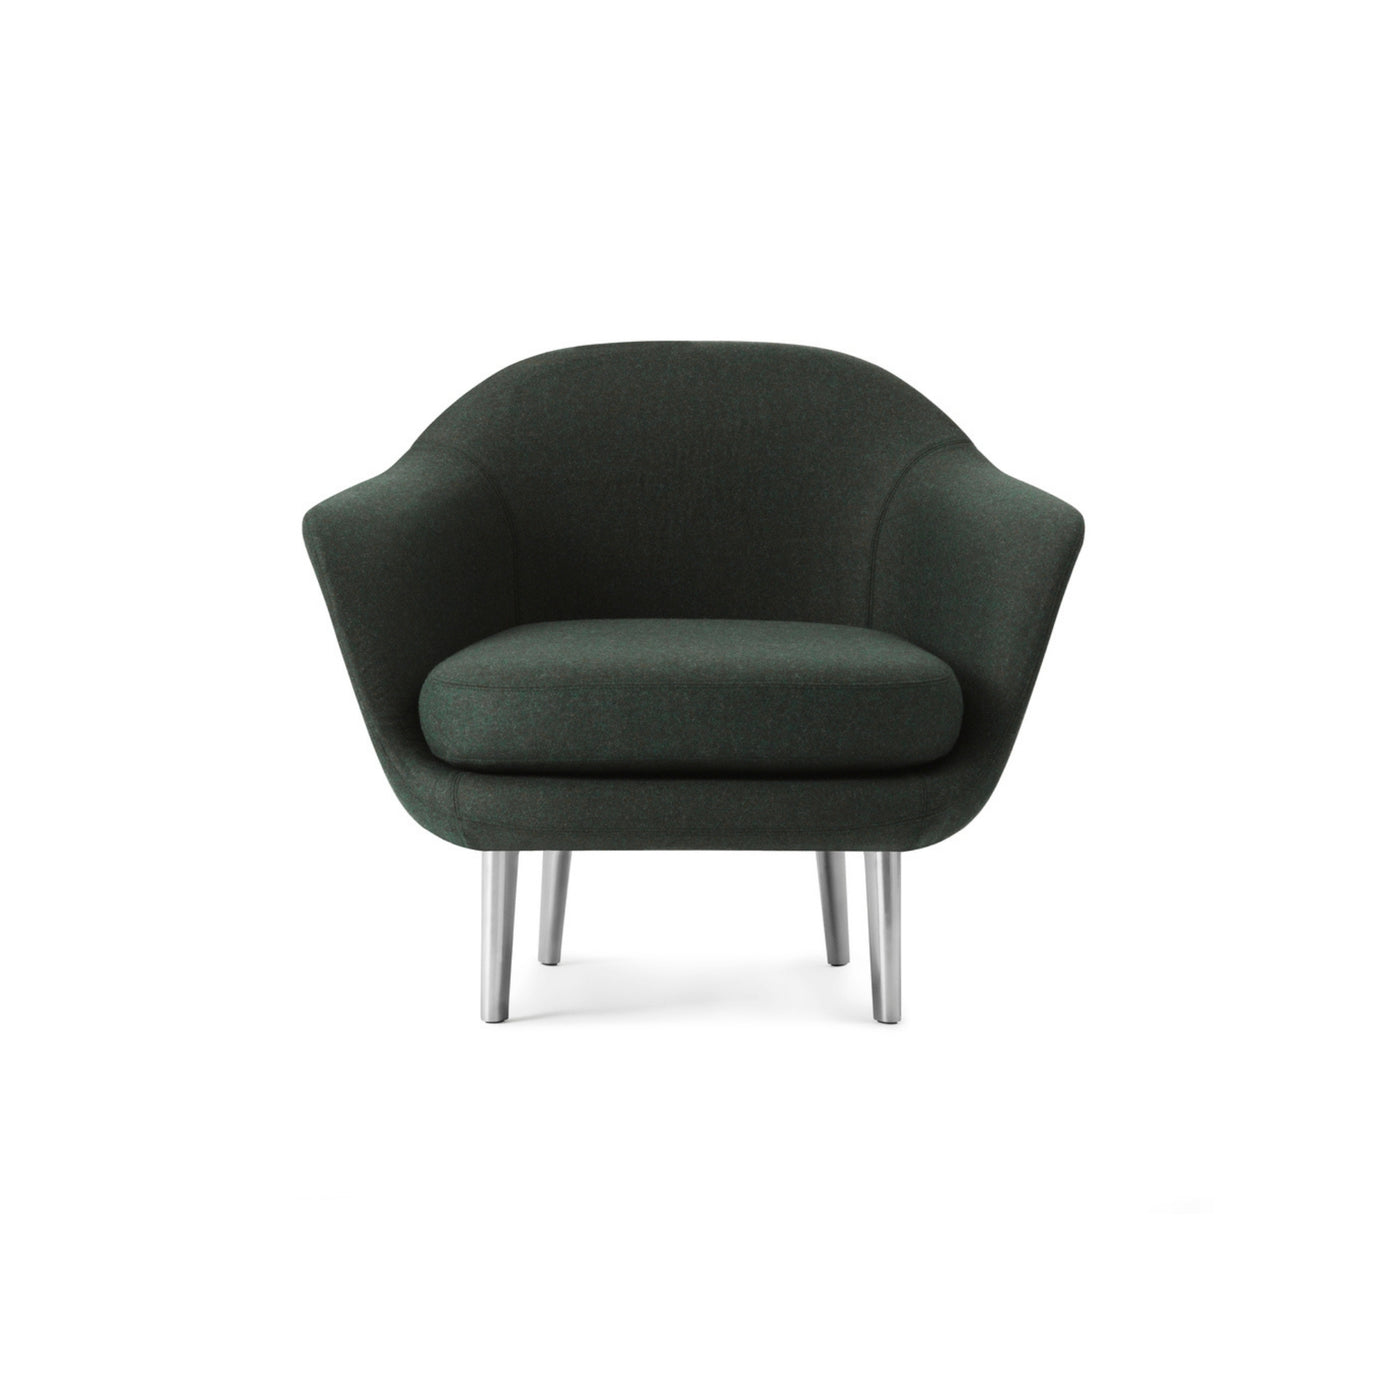 Normann Copenhagen Sum Armchair. Made to order at someday designs. #colour_synergy-couple